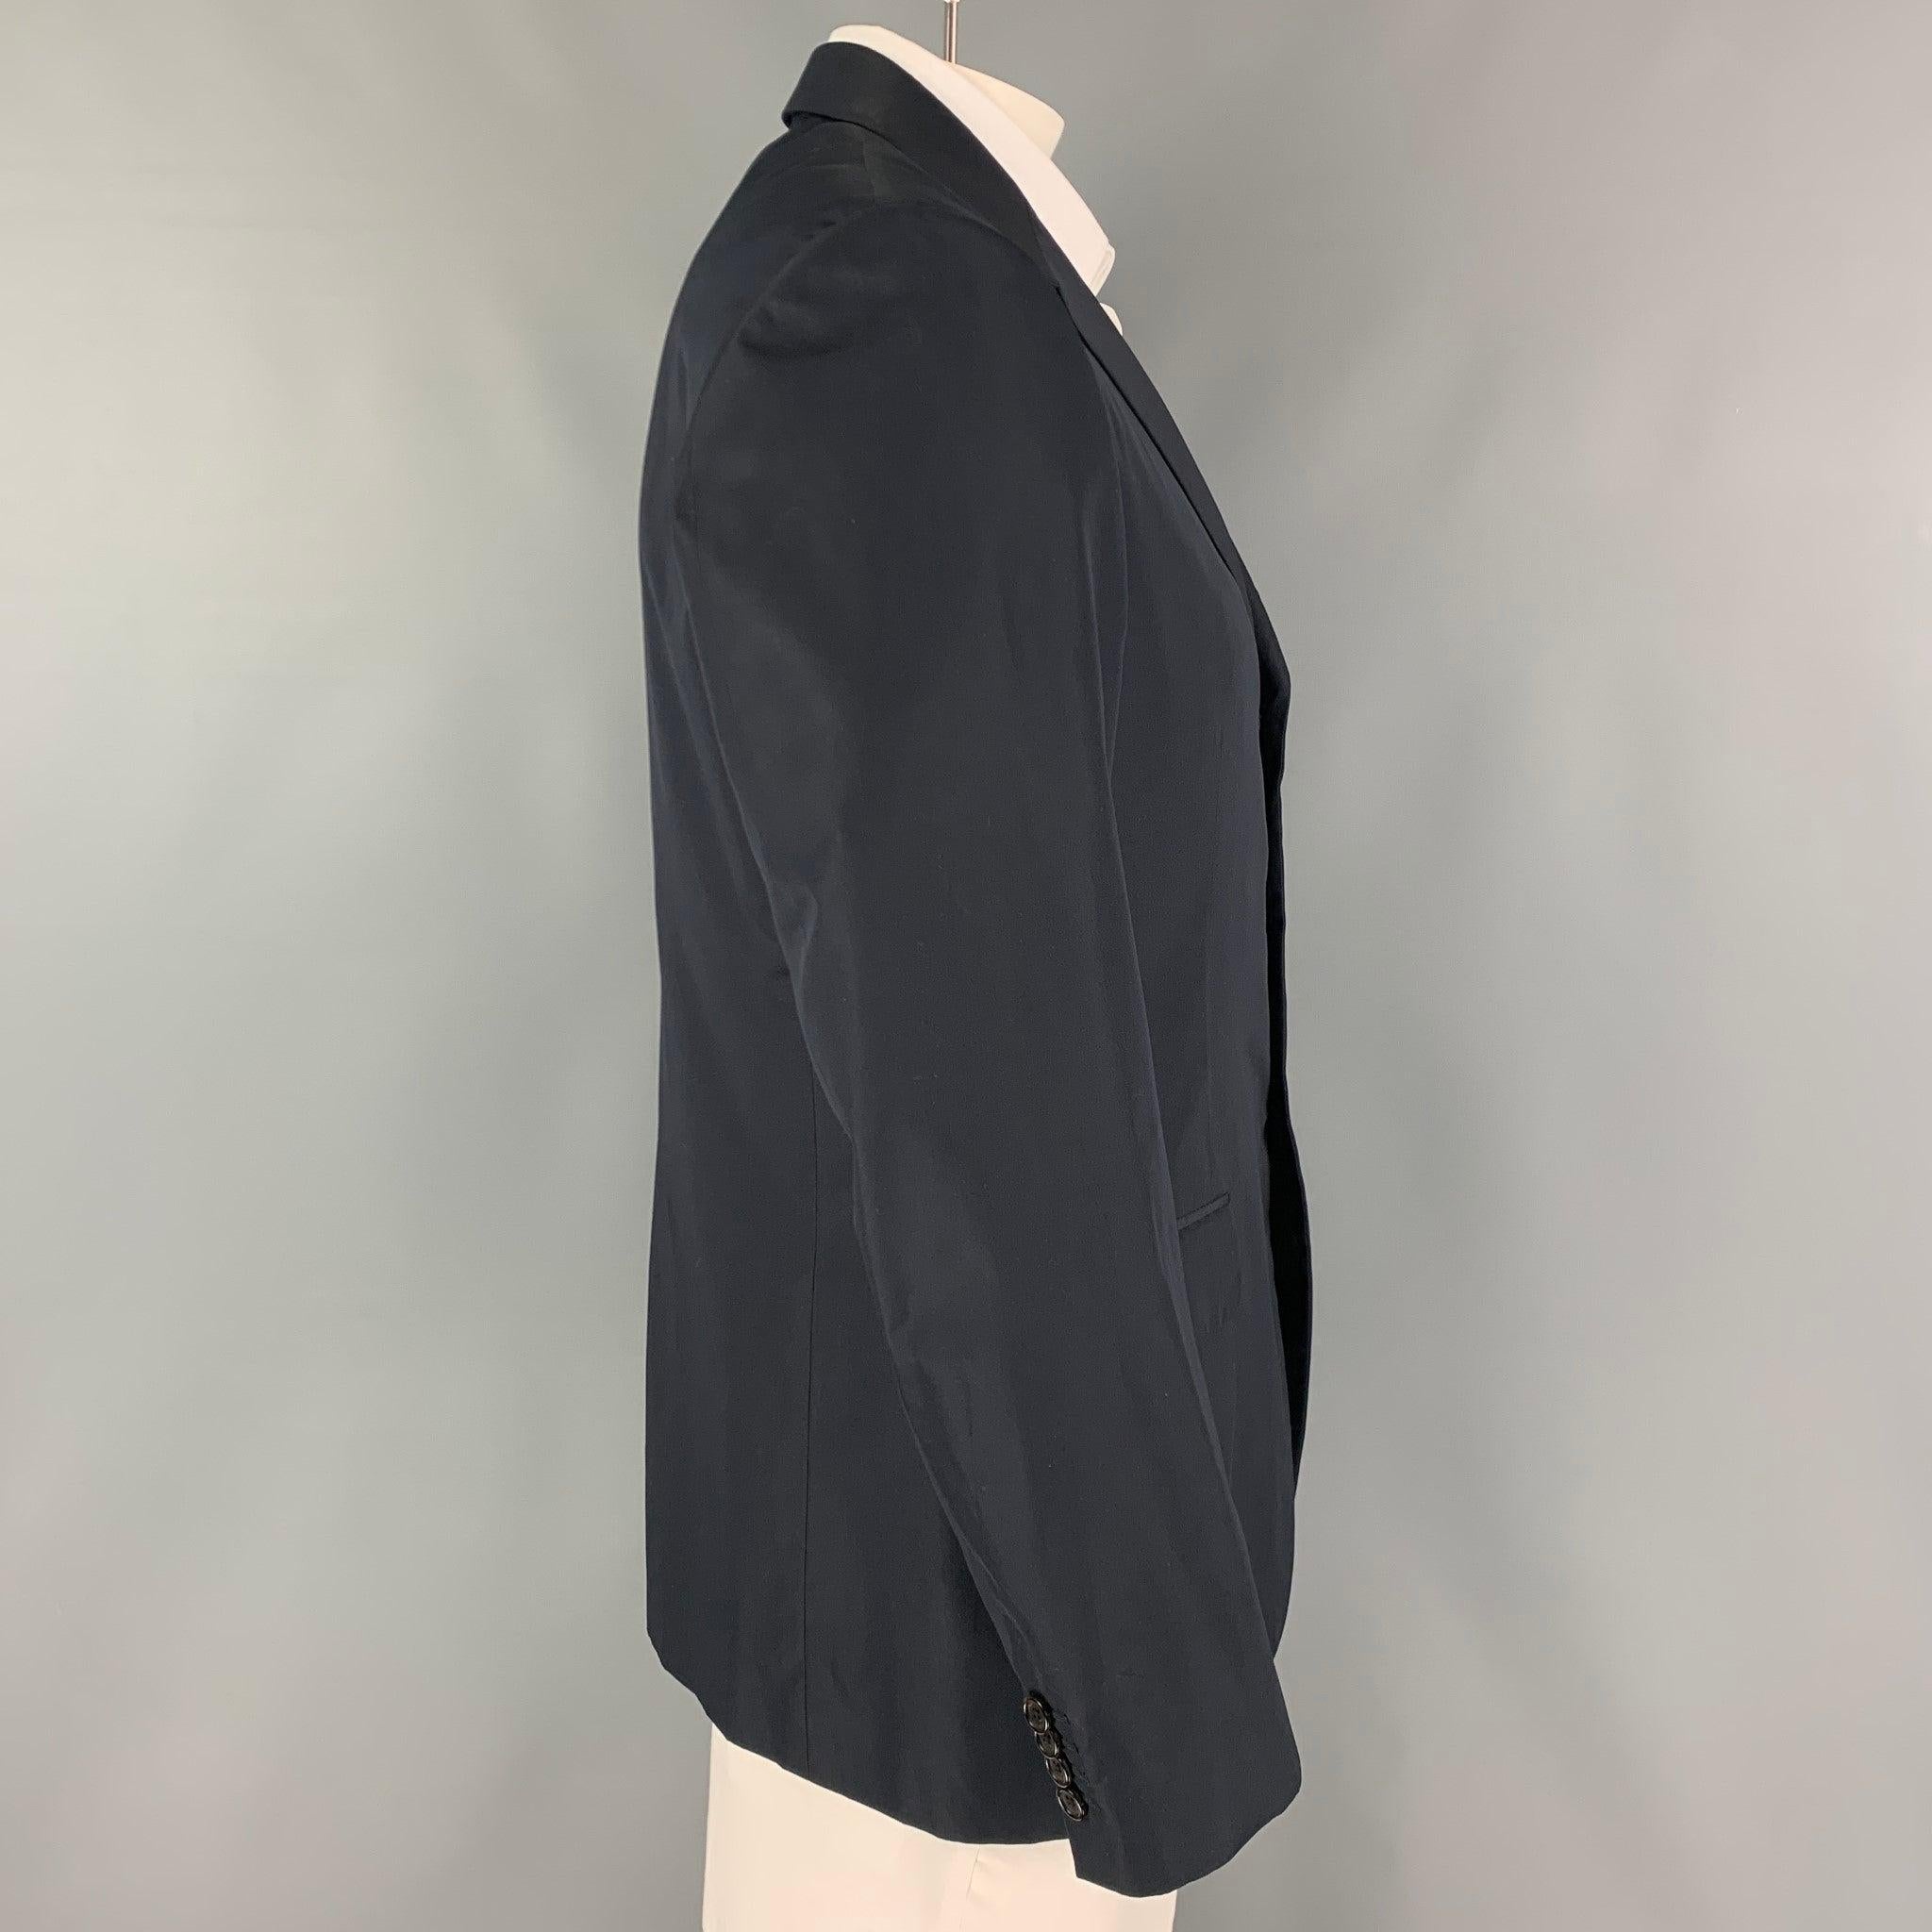 PRADA sport coat comes in a black silk with a full liner featuring a notch lapel, flap pockets, single back vent, and a three button closure. Made in Italy.
Excellent
Pre-Owned Condition. 

Marked:   52 R  

Measurements: 
 
Shoulder: 18 inches